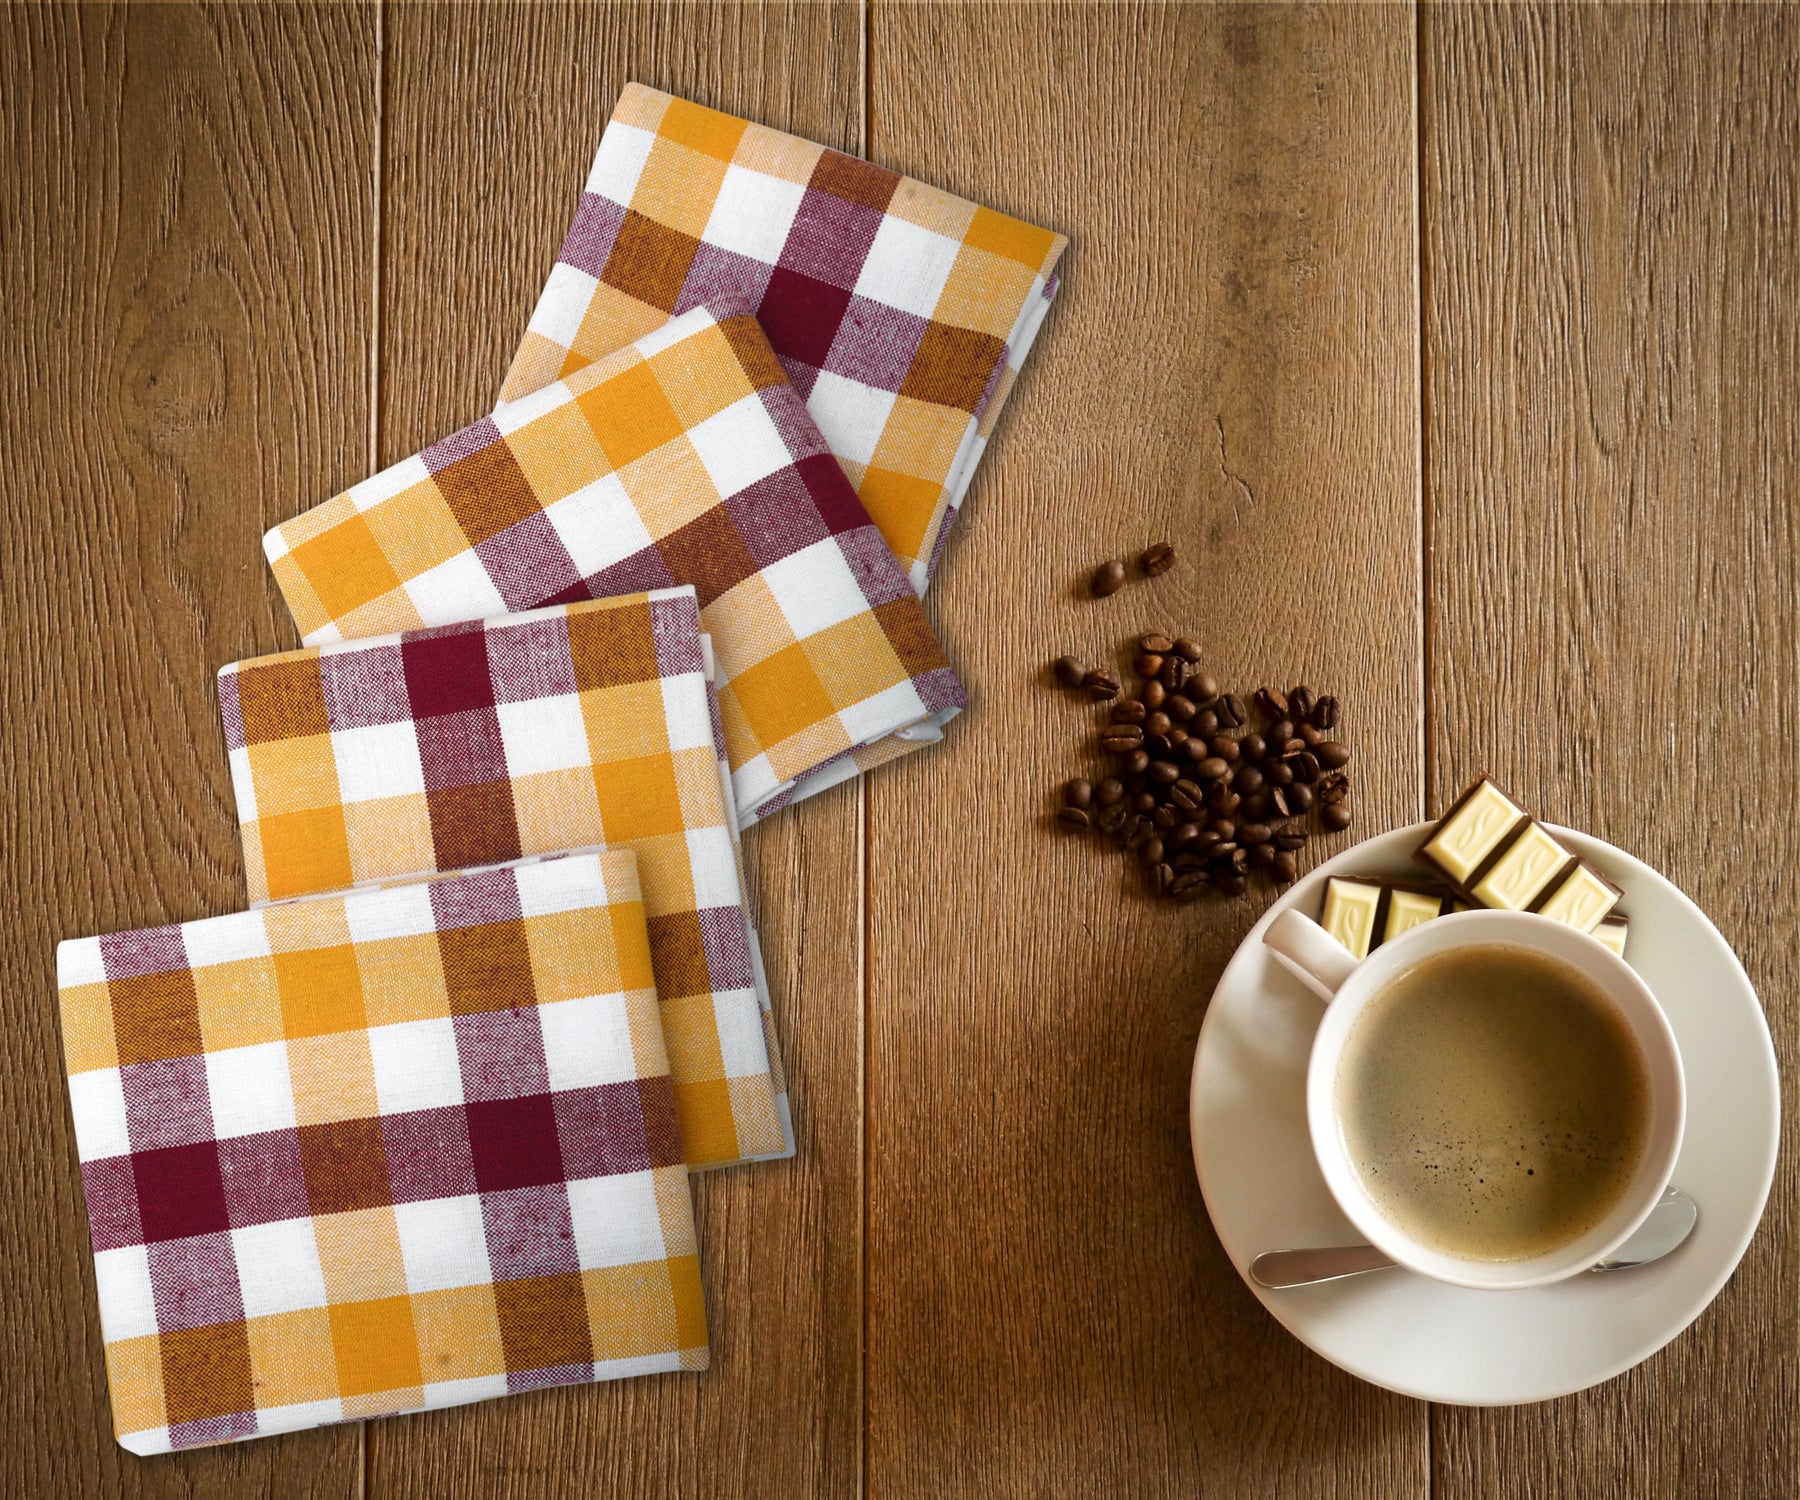 Kitchen tea towels are a versatile kitchen essential. They can be used for drying dishes, wiping counters, or even as a potholder. 